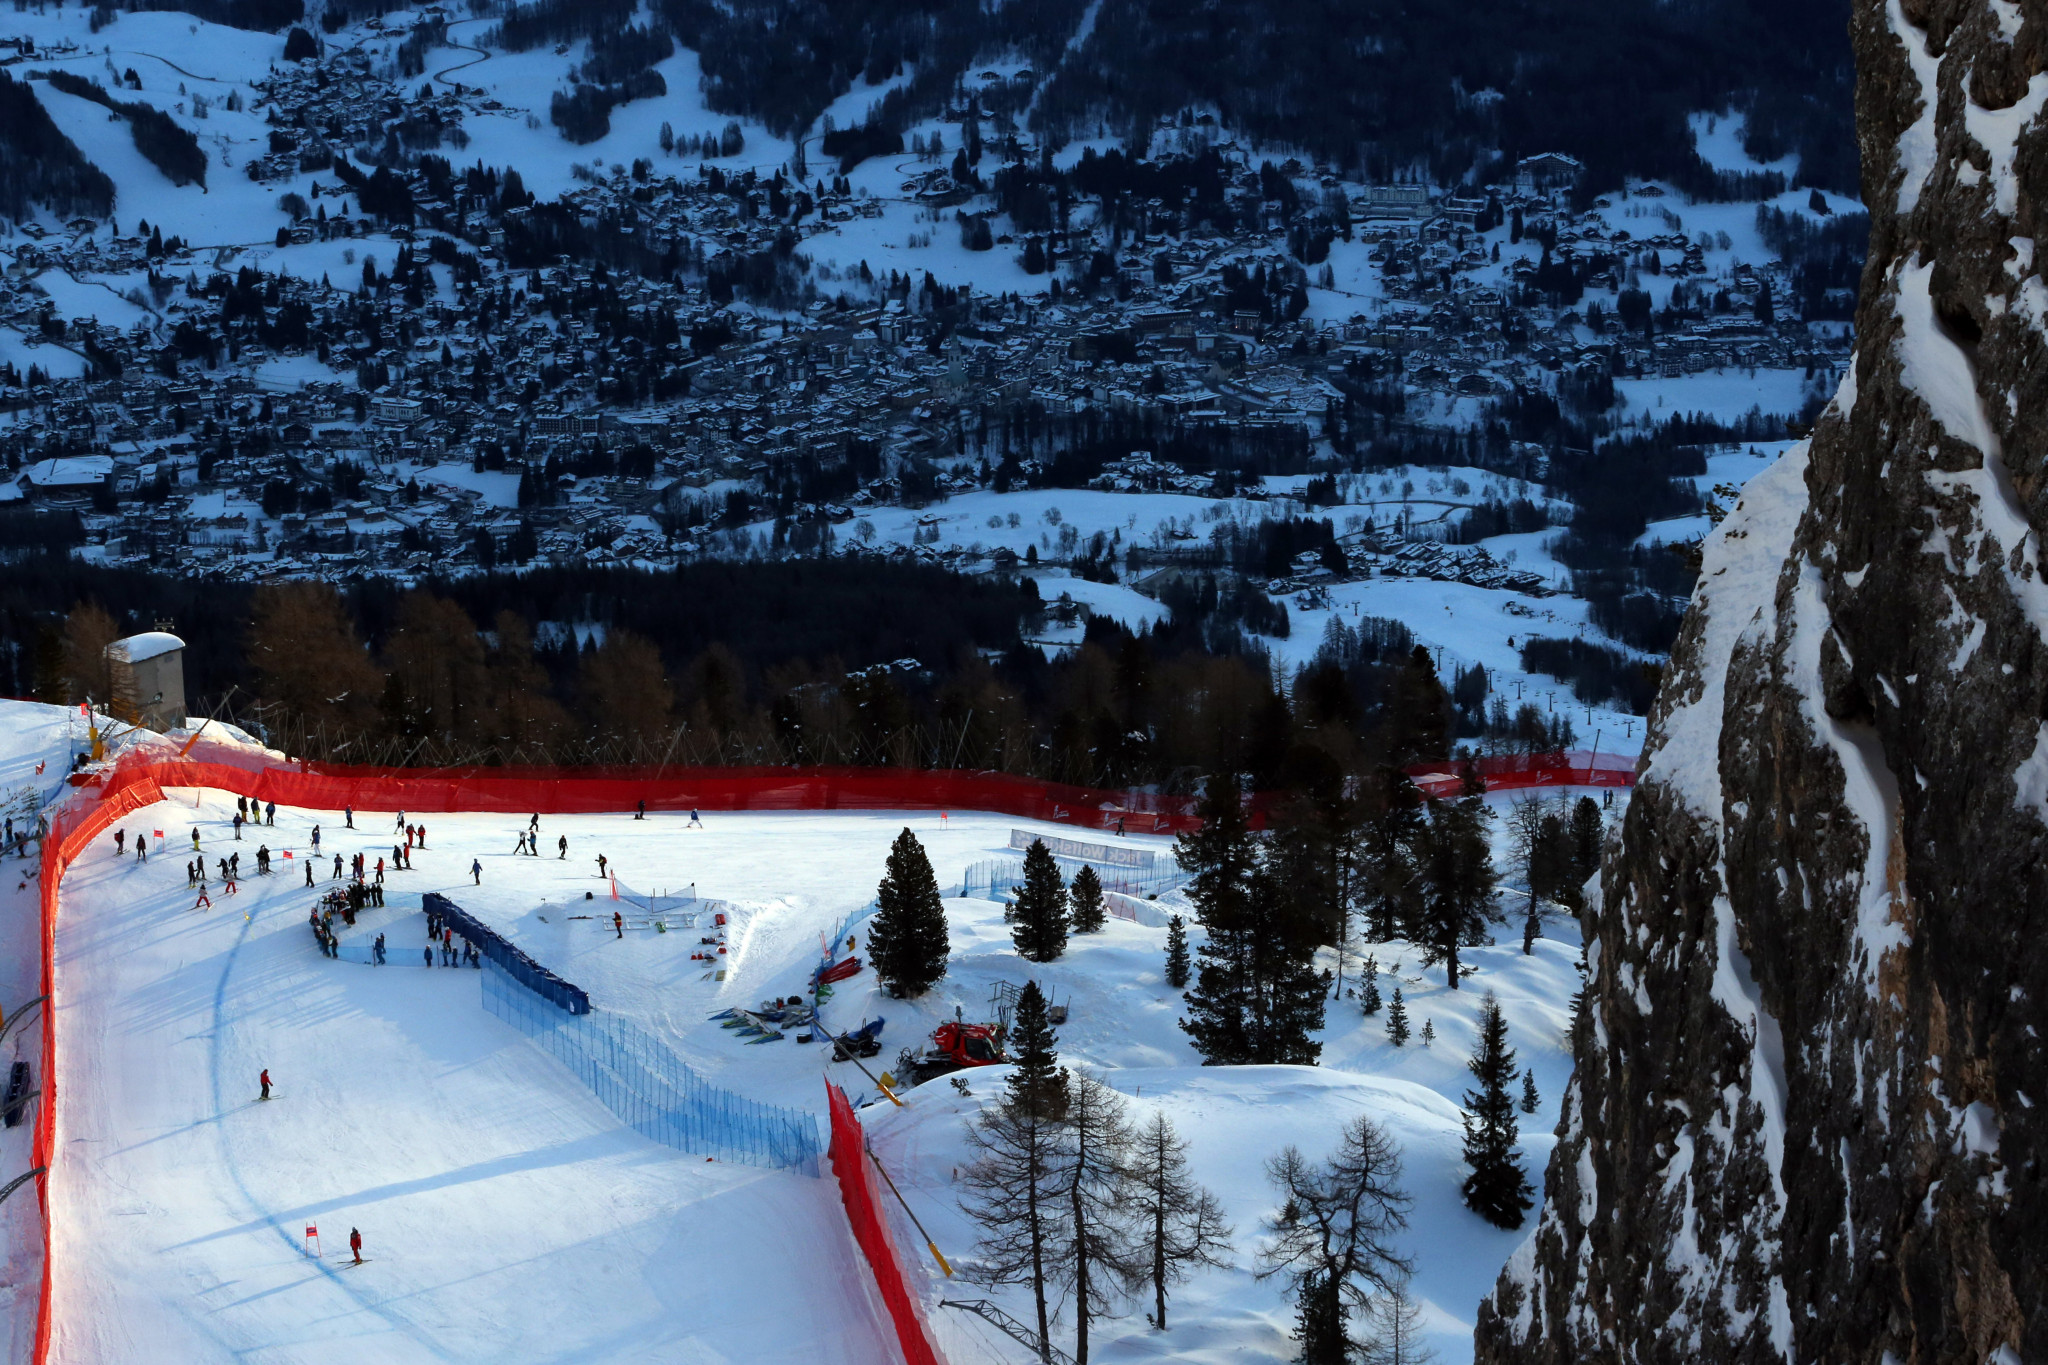 Cortina d'Ampezzo is on track to stage the 2021 FIS Alpine World Ski Championships ©Getty Images